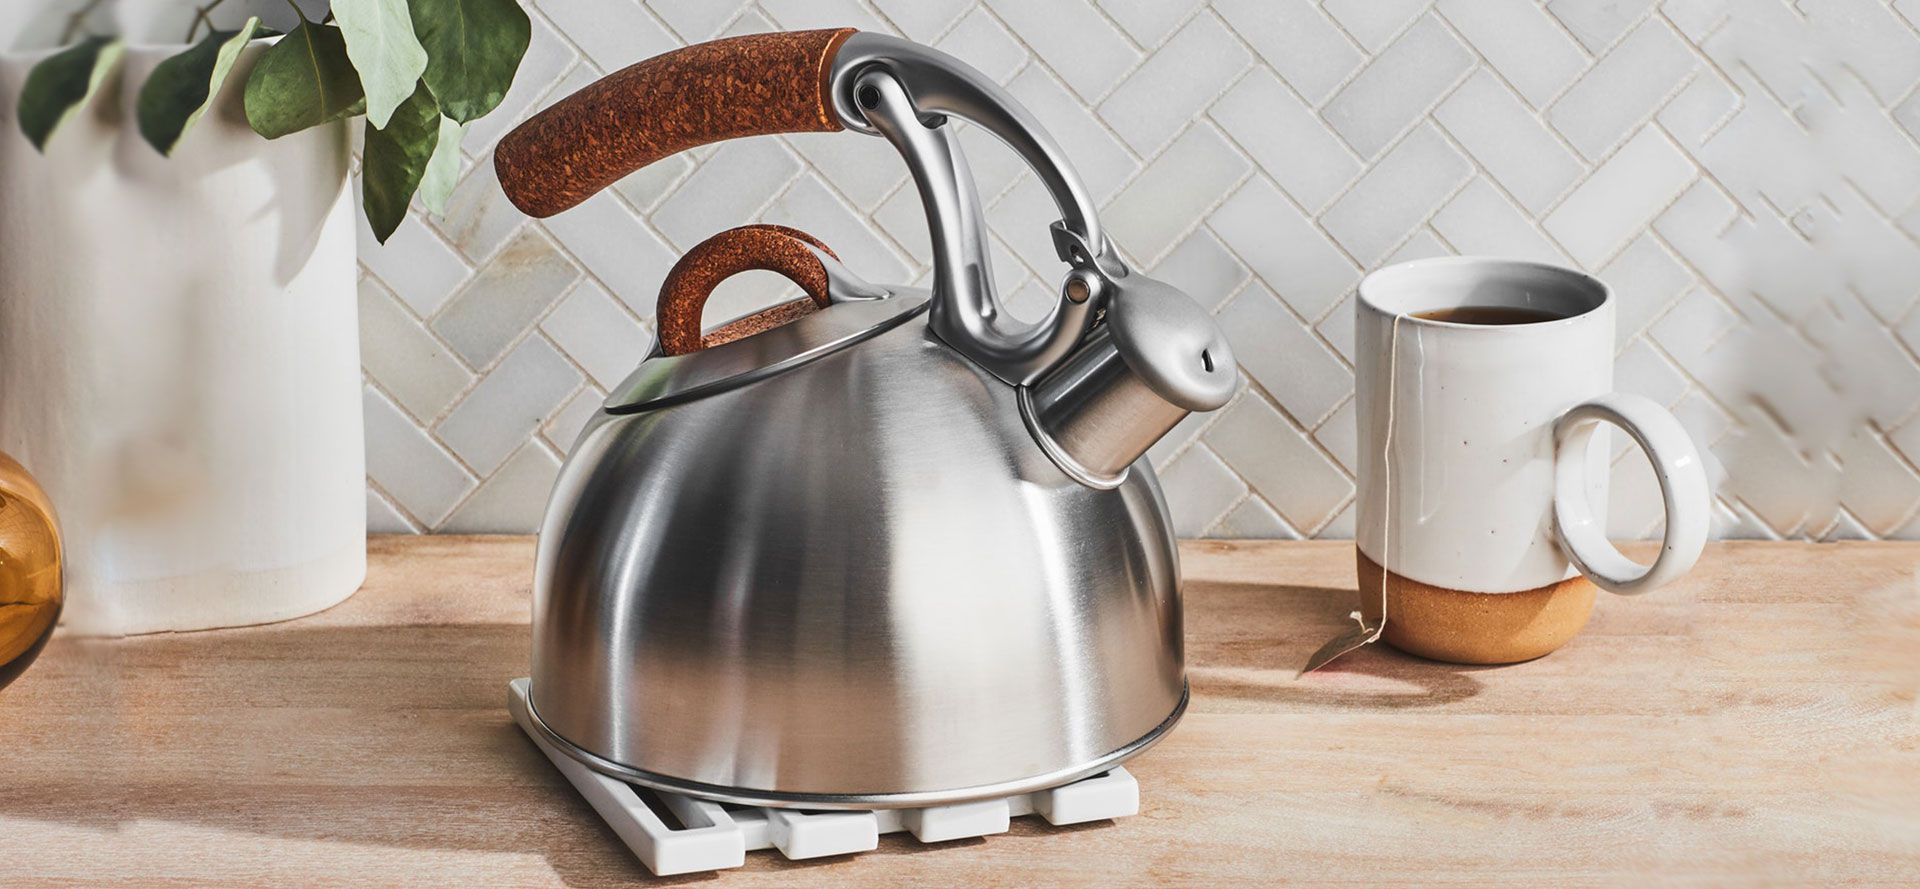 Salangae 3L Whistling Tea Kettle Polka Dot Kettle Stove Water Boiling Teapot Modern Stainless Steel Teapot for Home Office Coffee Kitchen Hotel